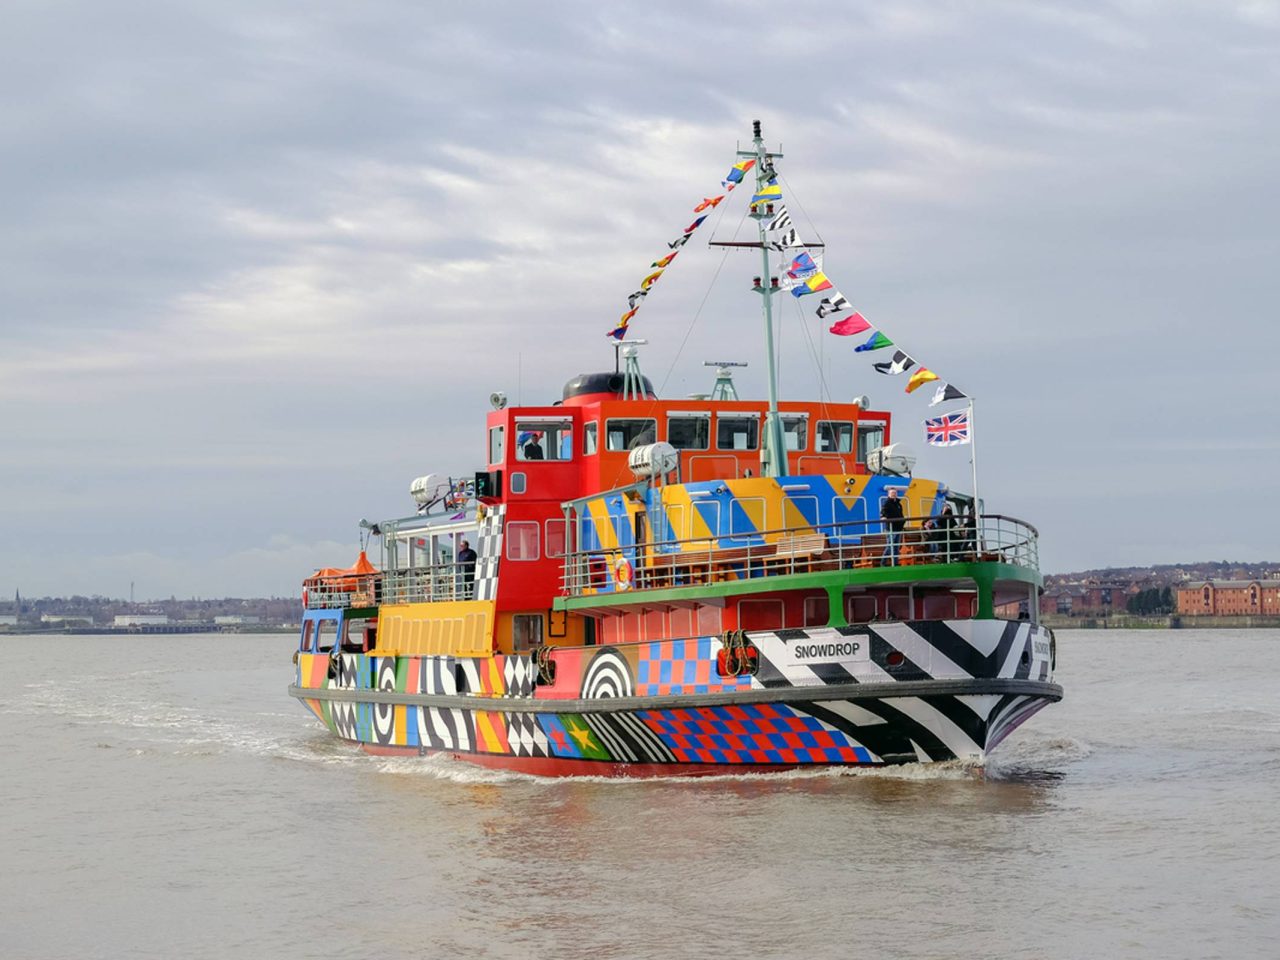 A colouful patterned ferry sailing across the River Mersey.